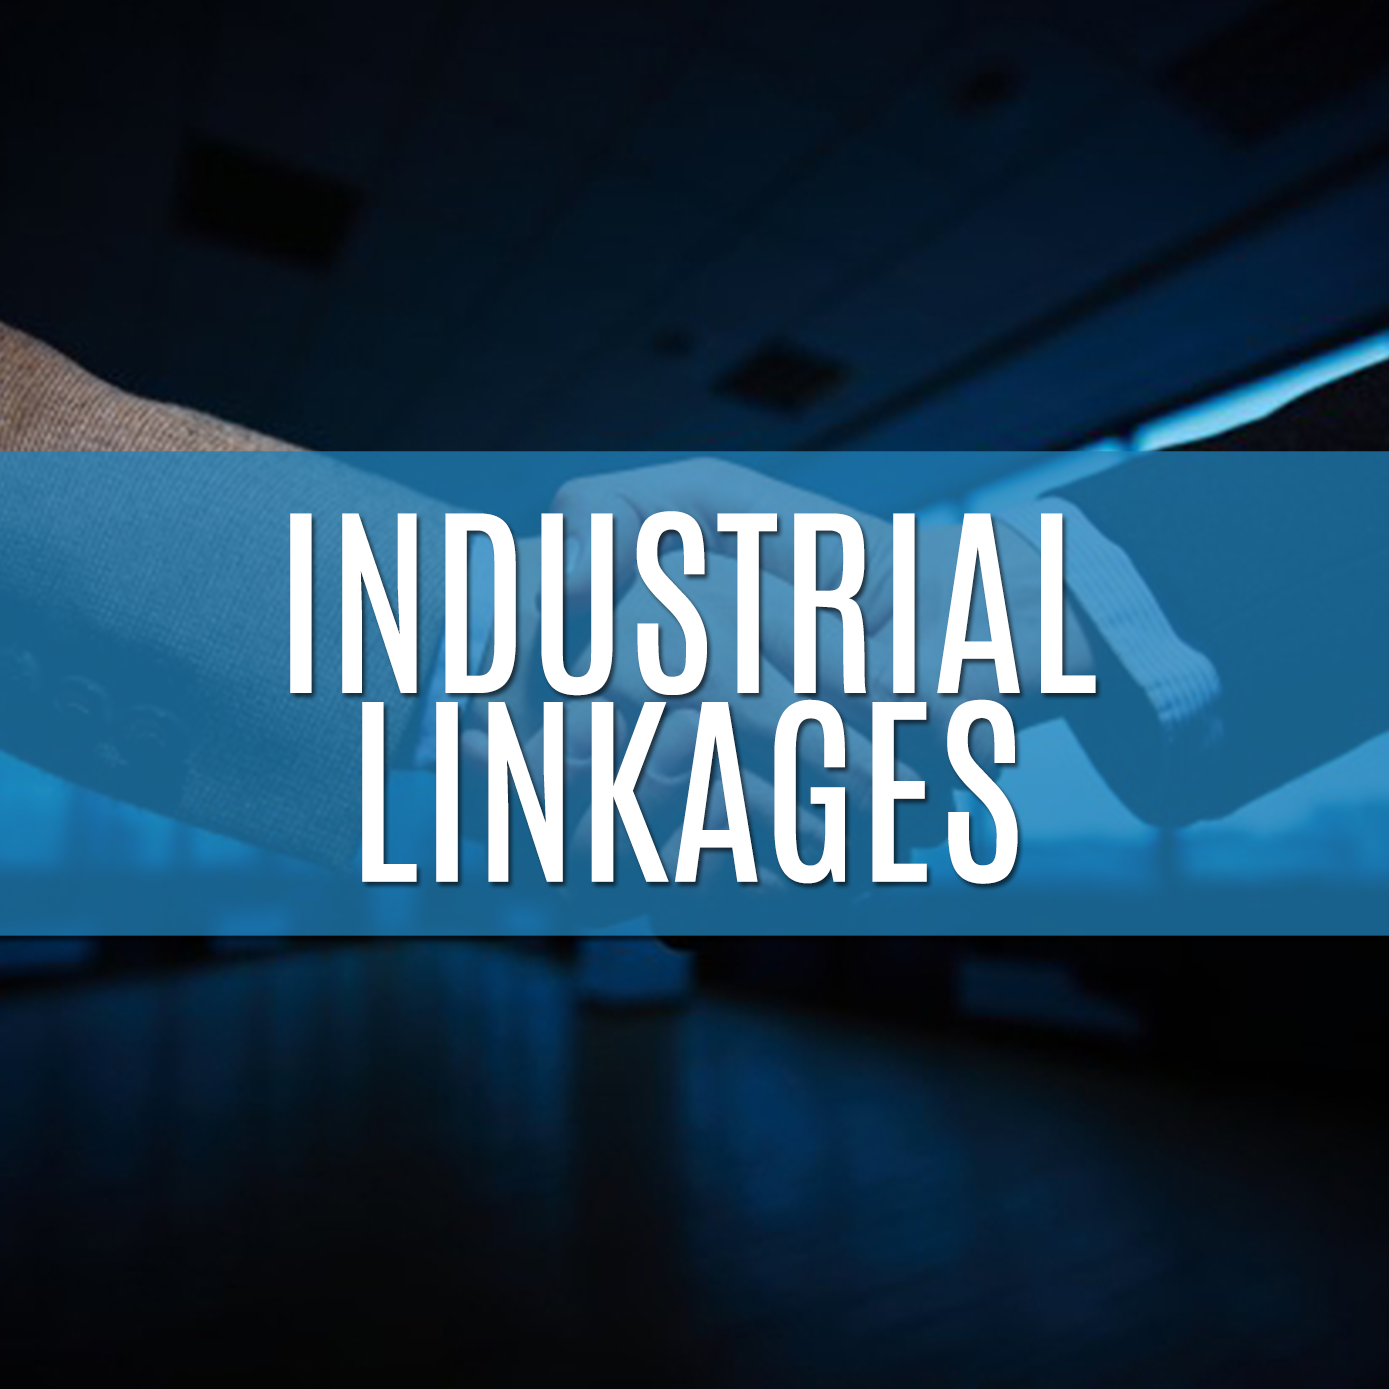 INDUSTRIAL LINKAGES